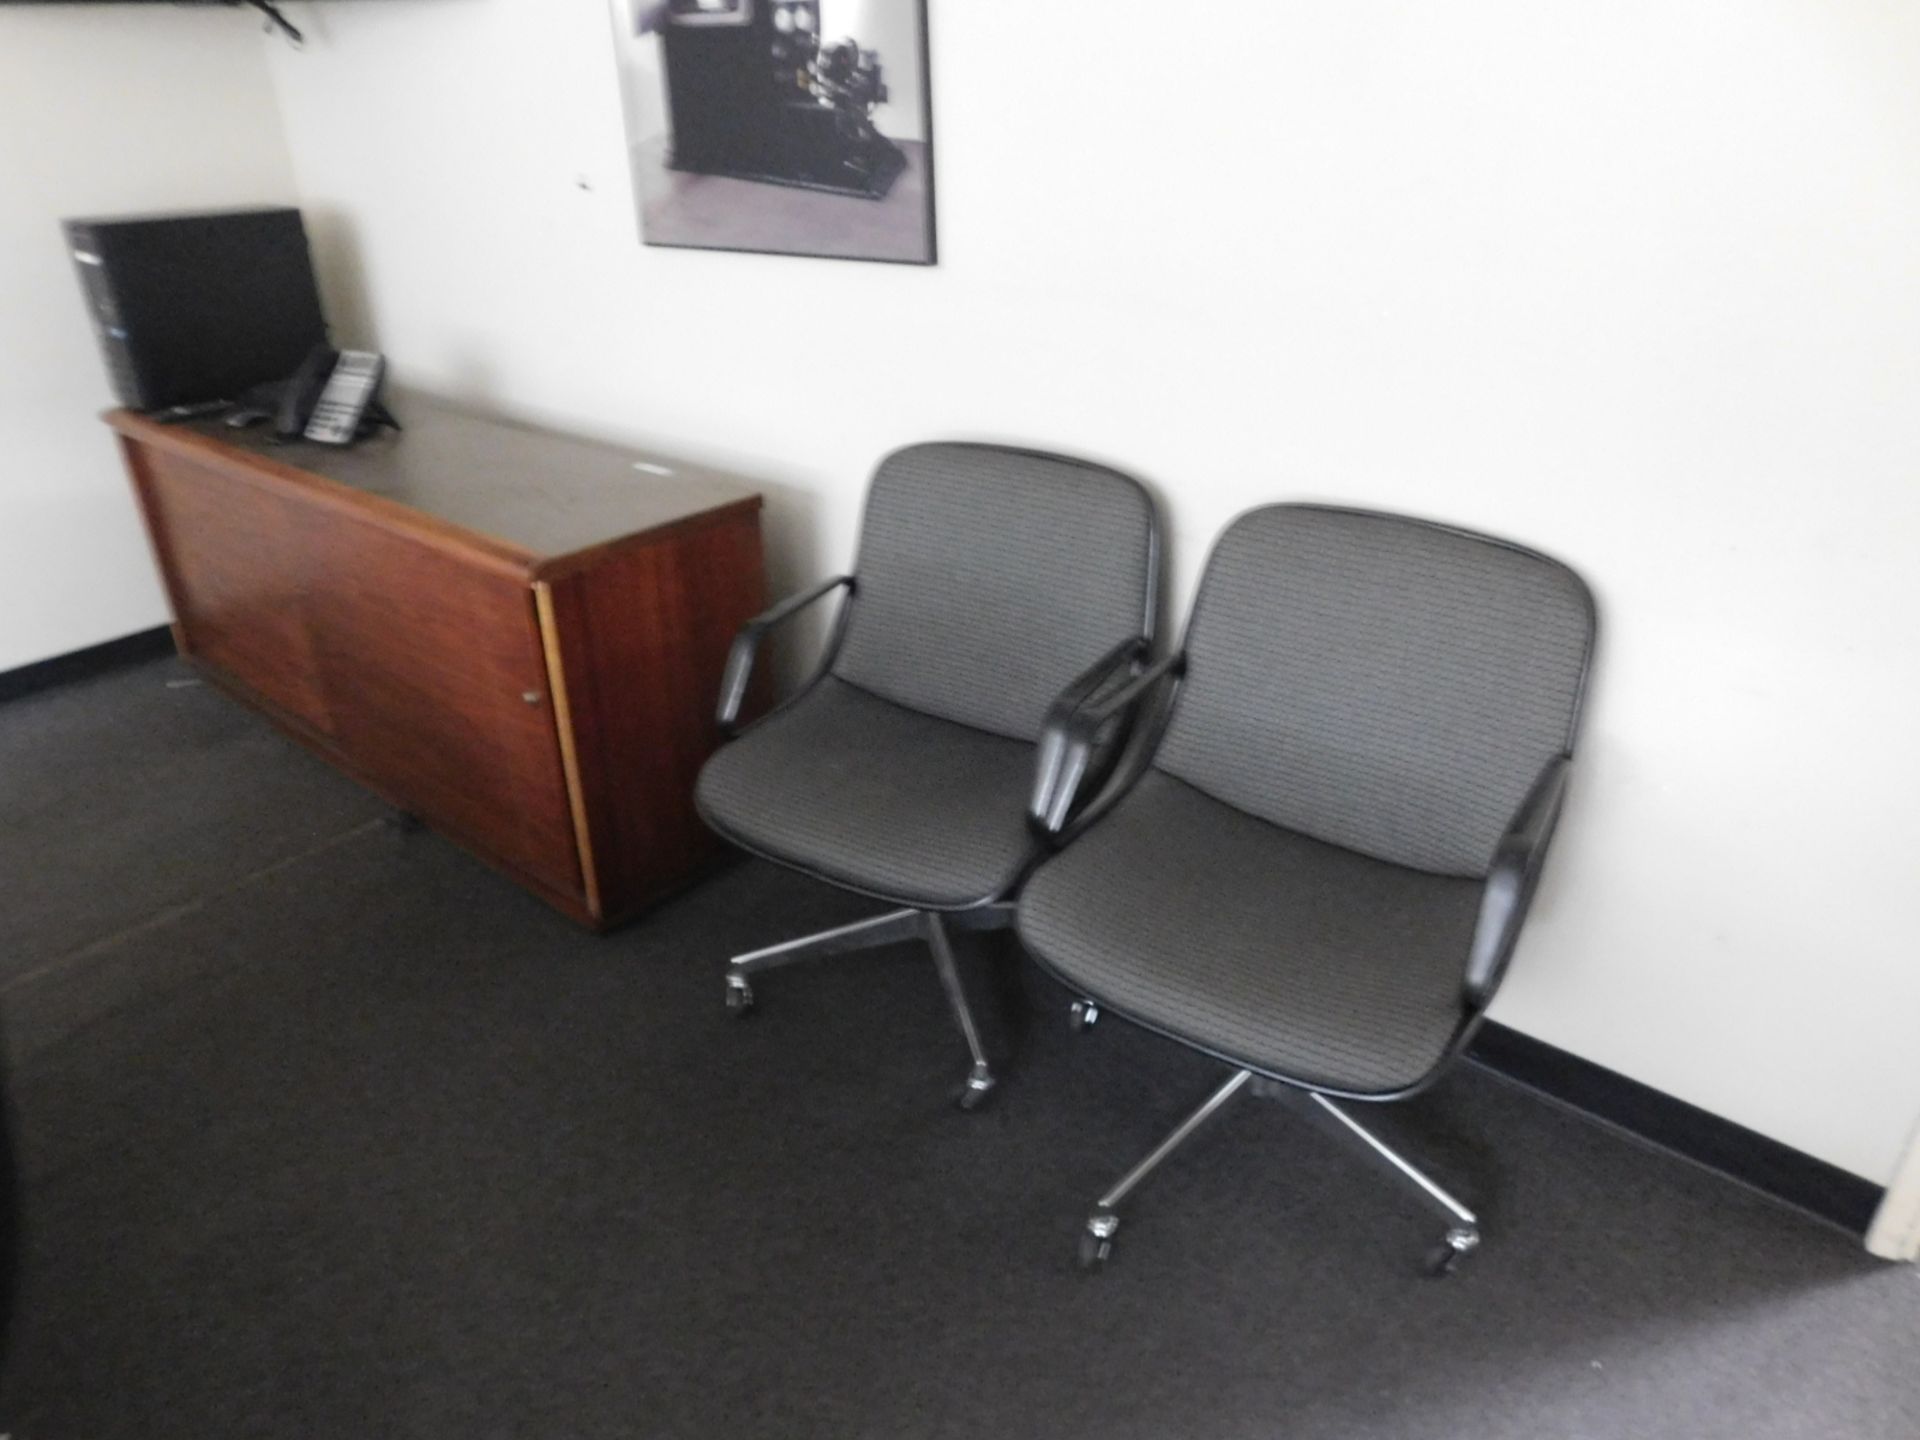 LOT - CONTENTS OF ROOM: 10' CONFERENCE TABLE, CHAIRS, INSIGNIA 55" LED TV MODEL NS-D421NA16 W/ - Image 2 of 5